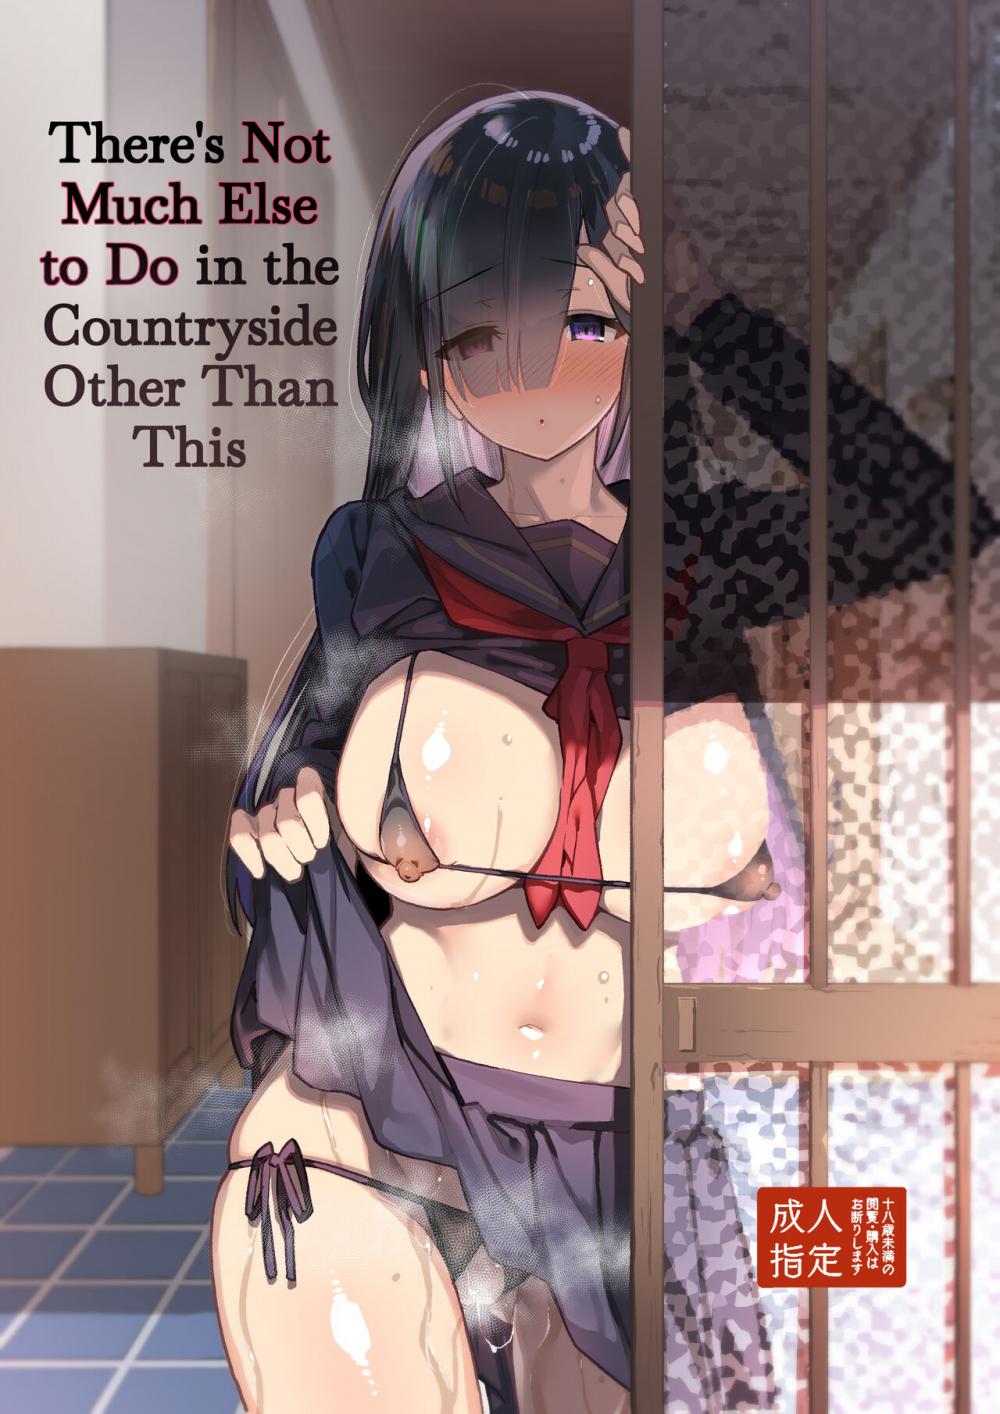 Hentai Manga Comic-There's Not Much Else to Do in the Countryside Other Than This-Read-1